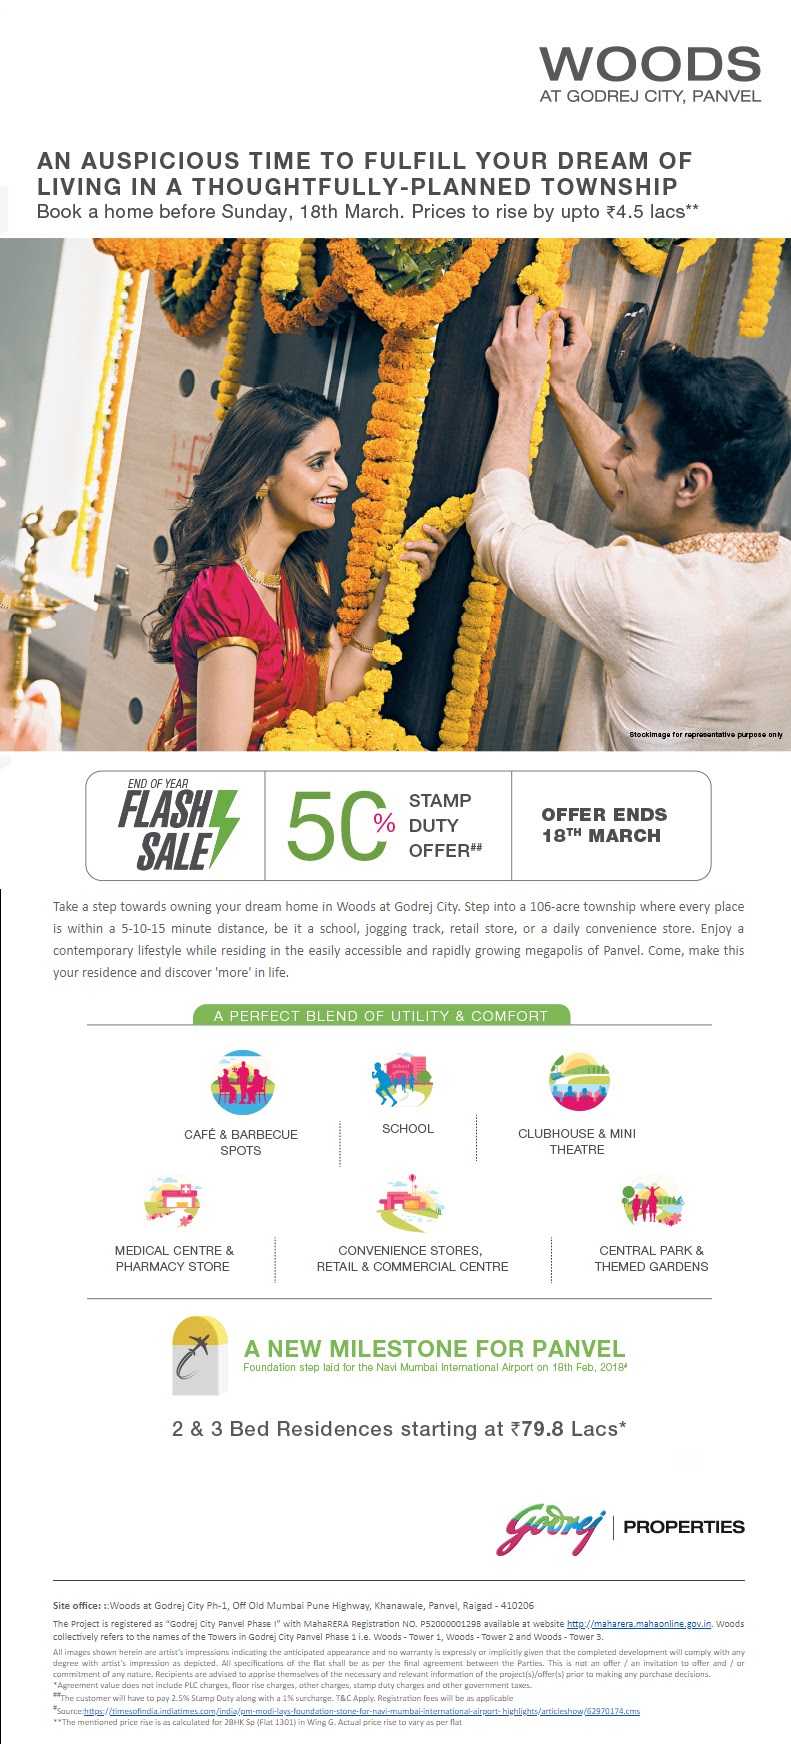 Book your home with 50% stamp duty offer at Godrej Woods in Navi Mumbai